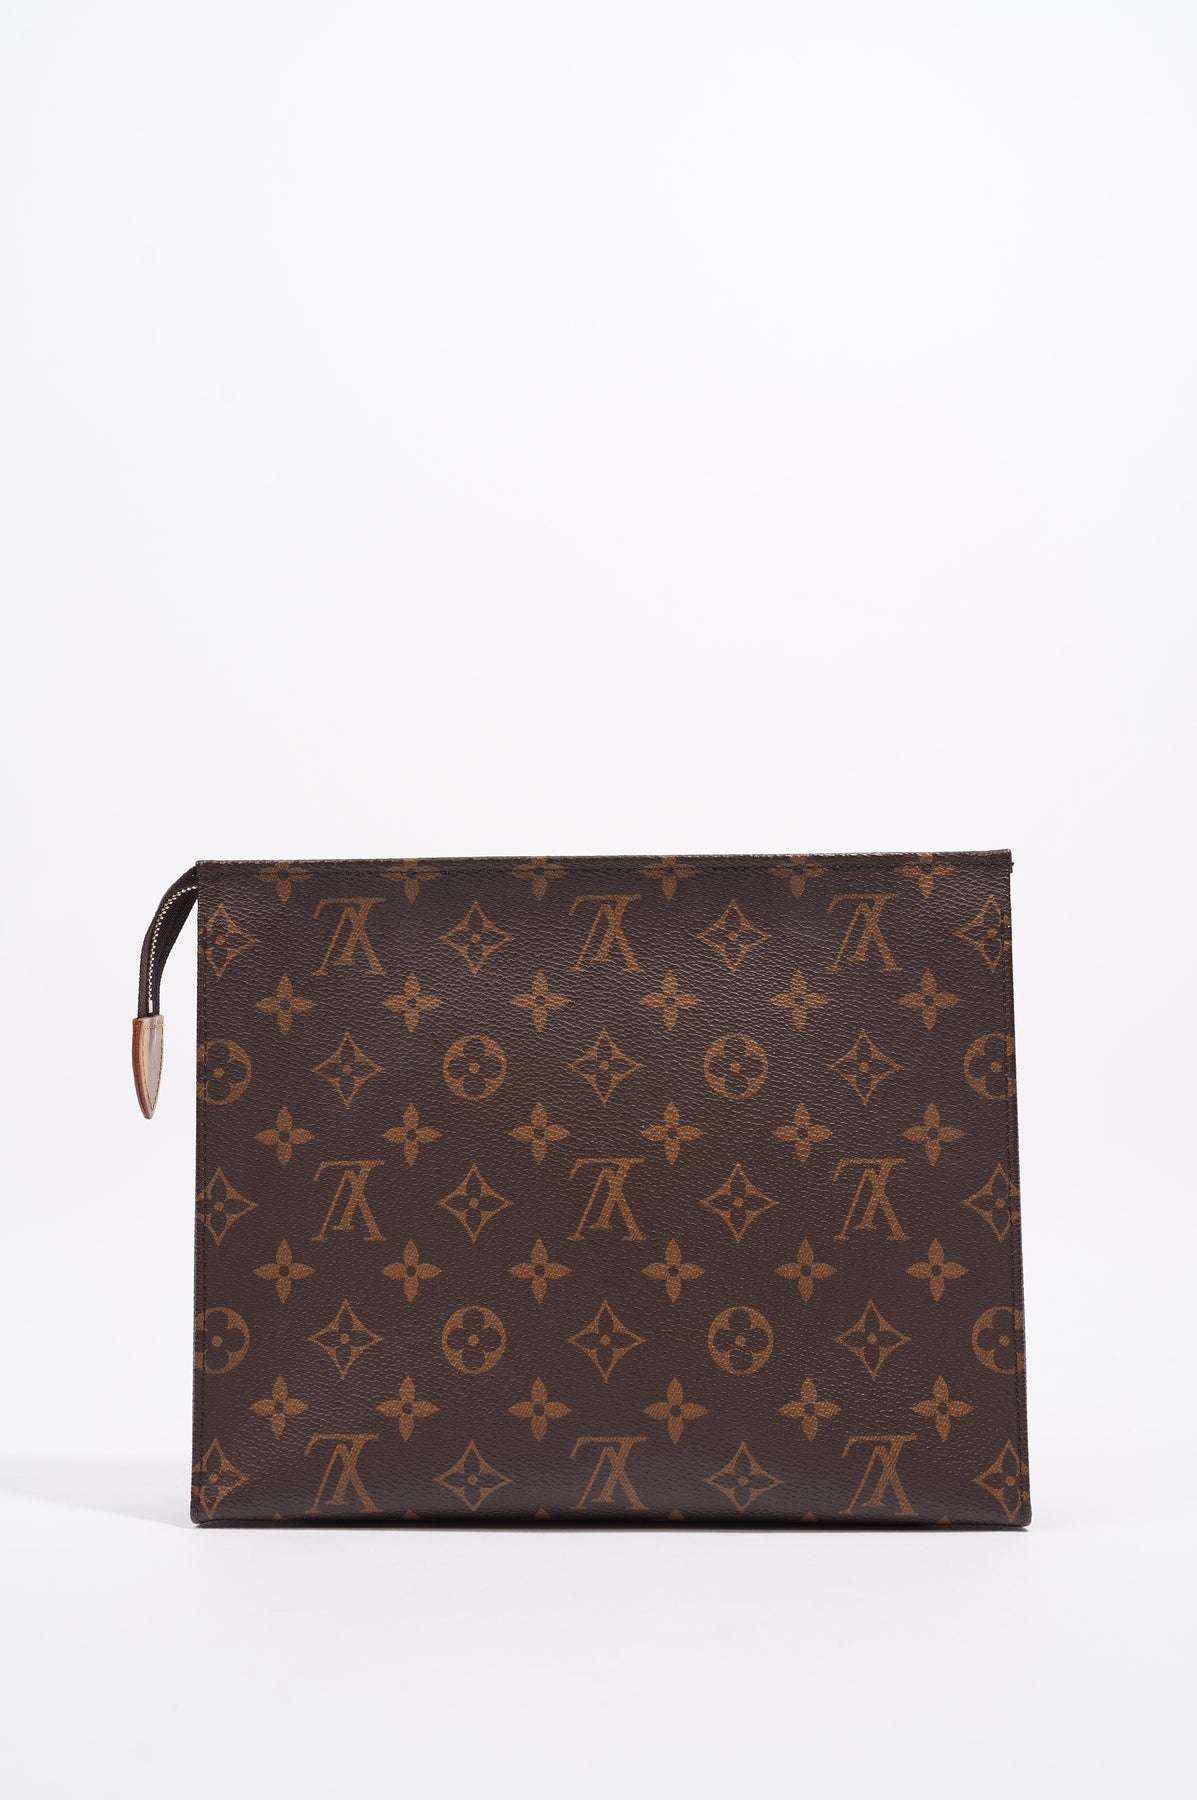 Louis Vuitton New 2020 Limited Toiletry 26 Monogram Canvas Clutch - Tradesy